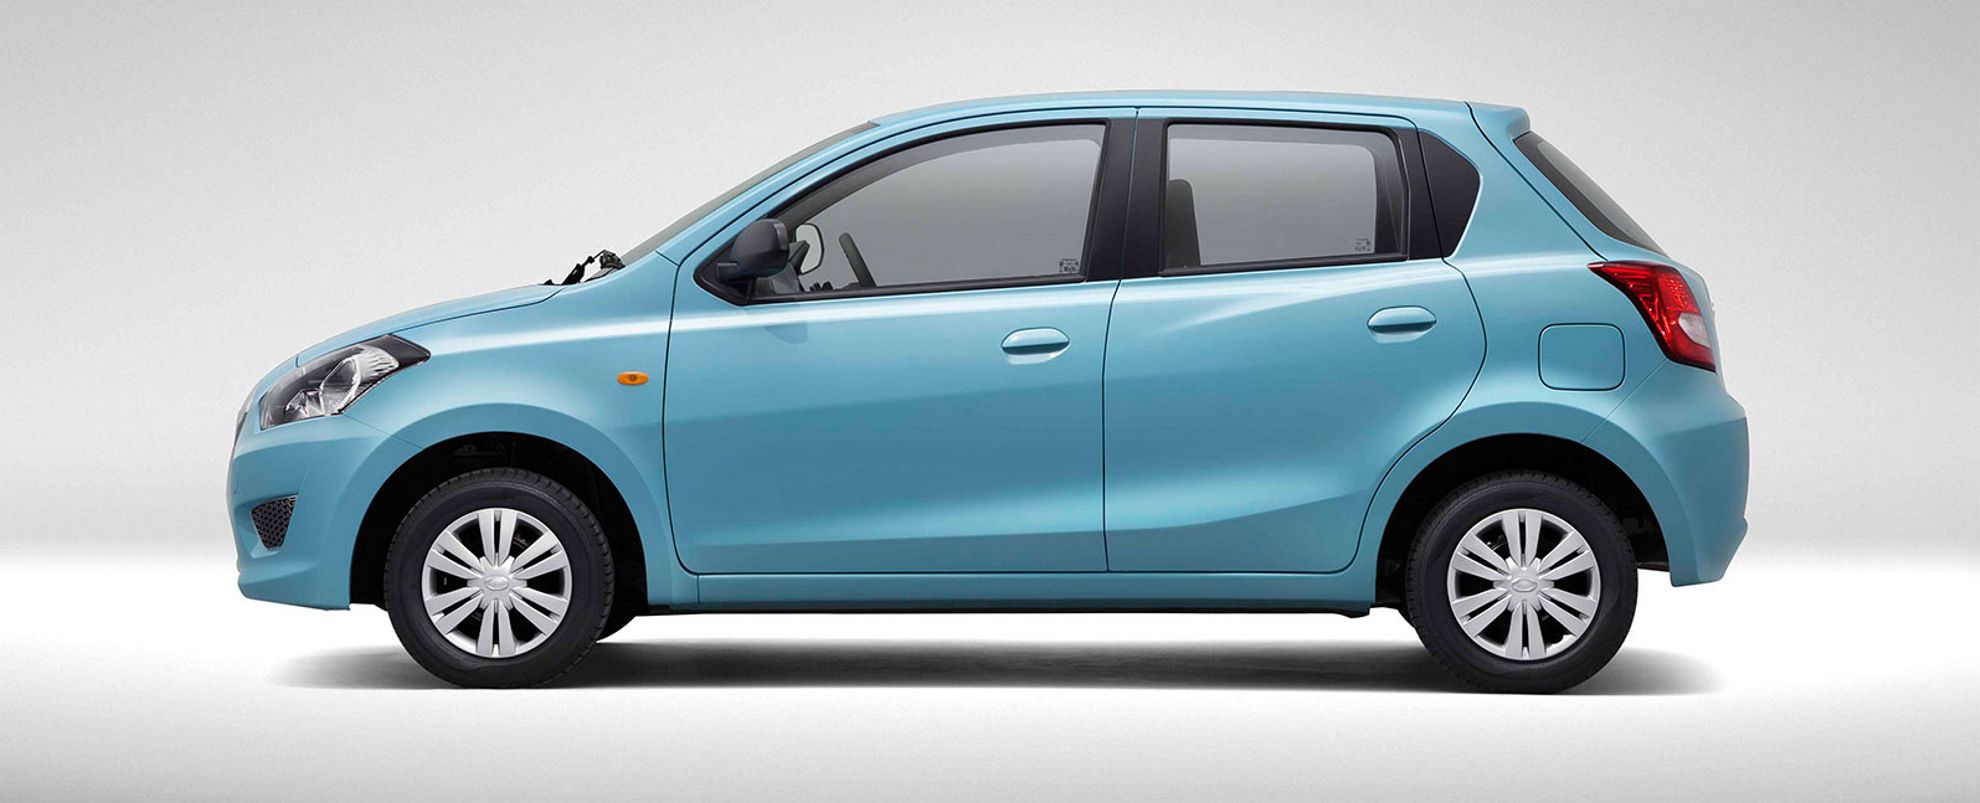 Production of Datsun Go in India